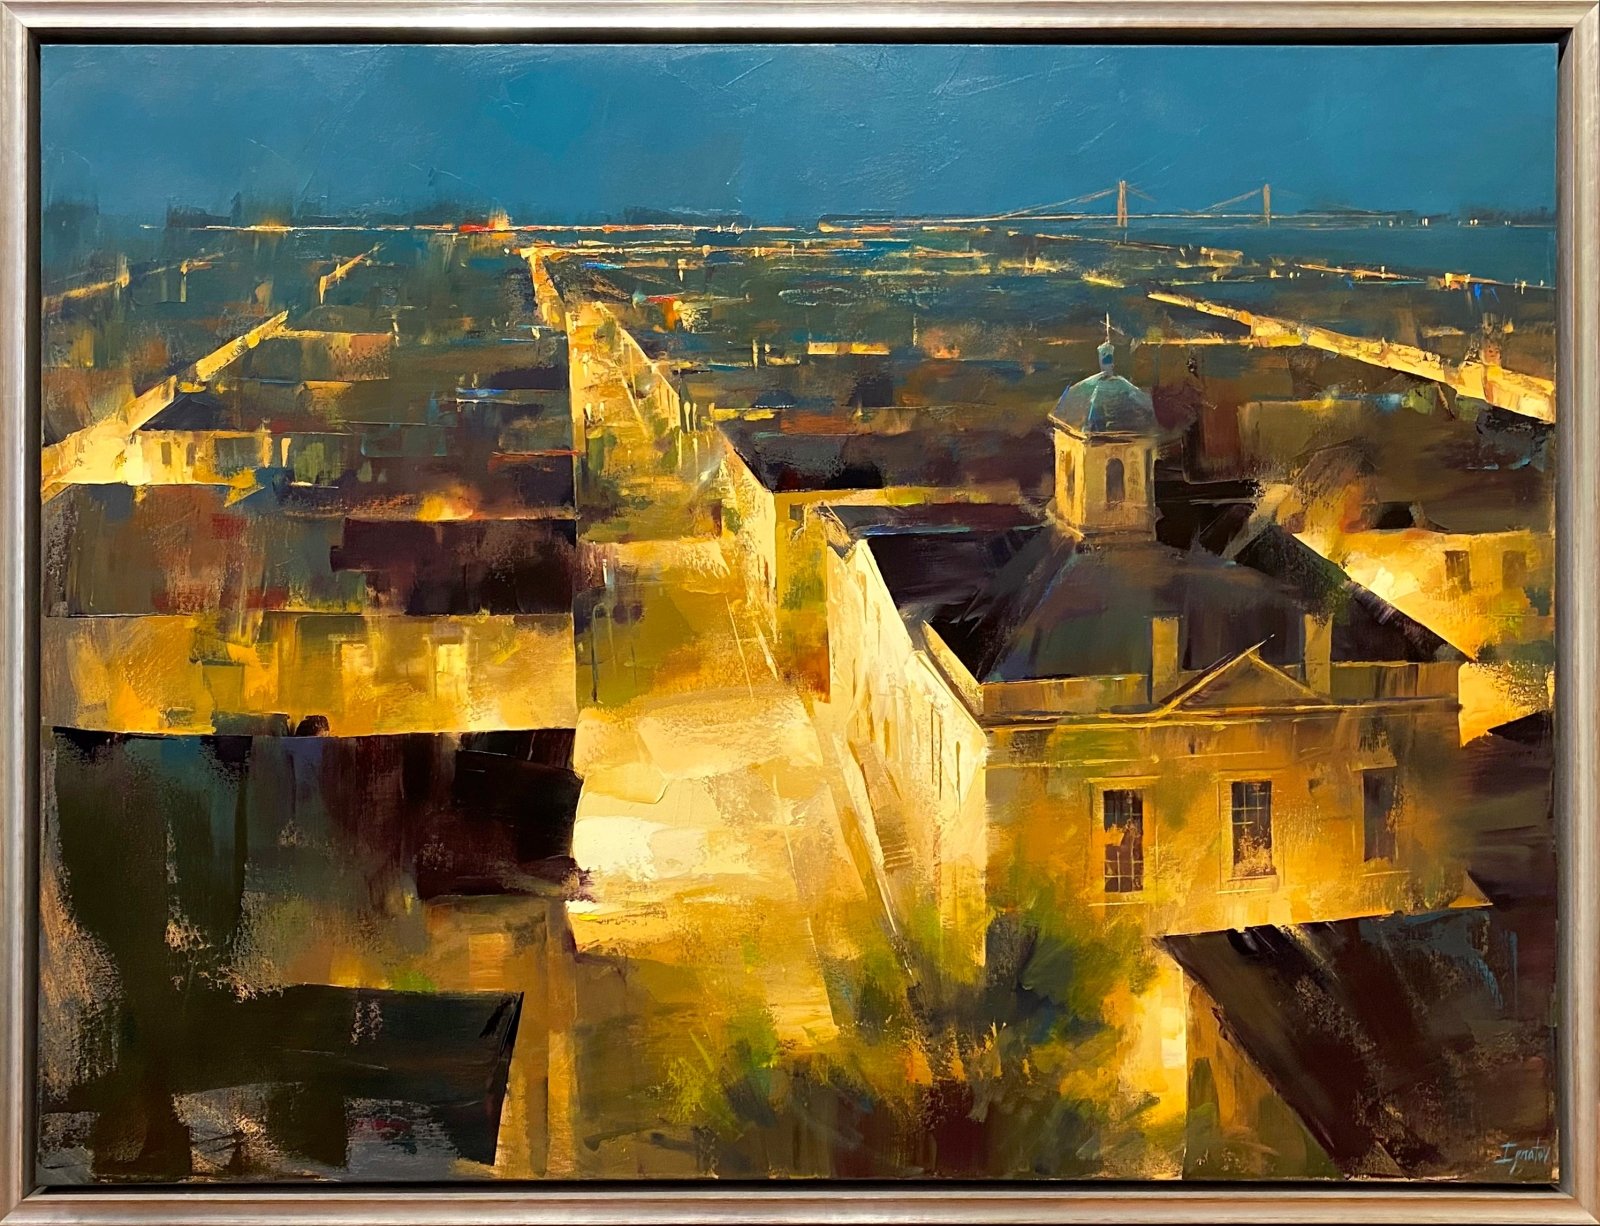 East Bay and Broad, Nocturne by Ignat Ignatov at LePrince Galleries